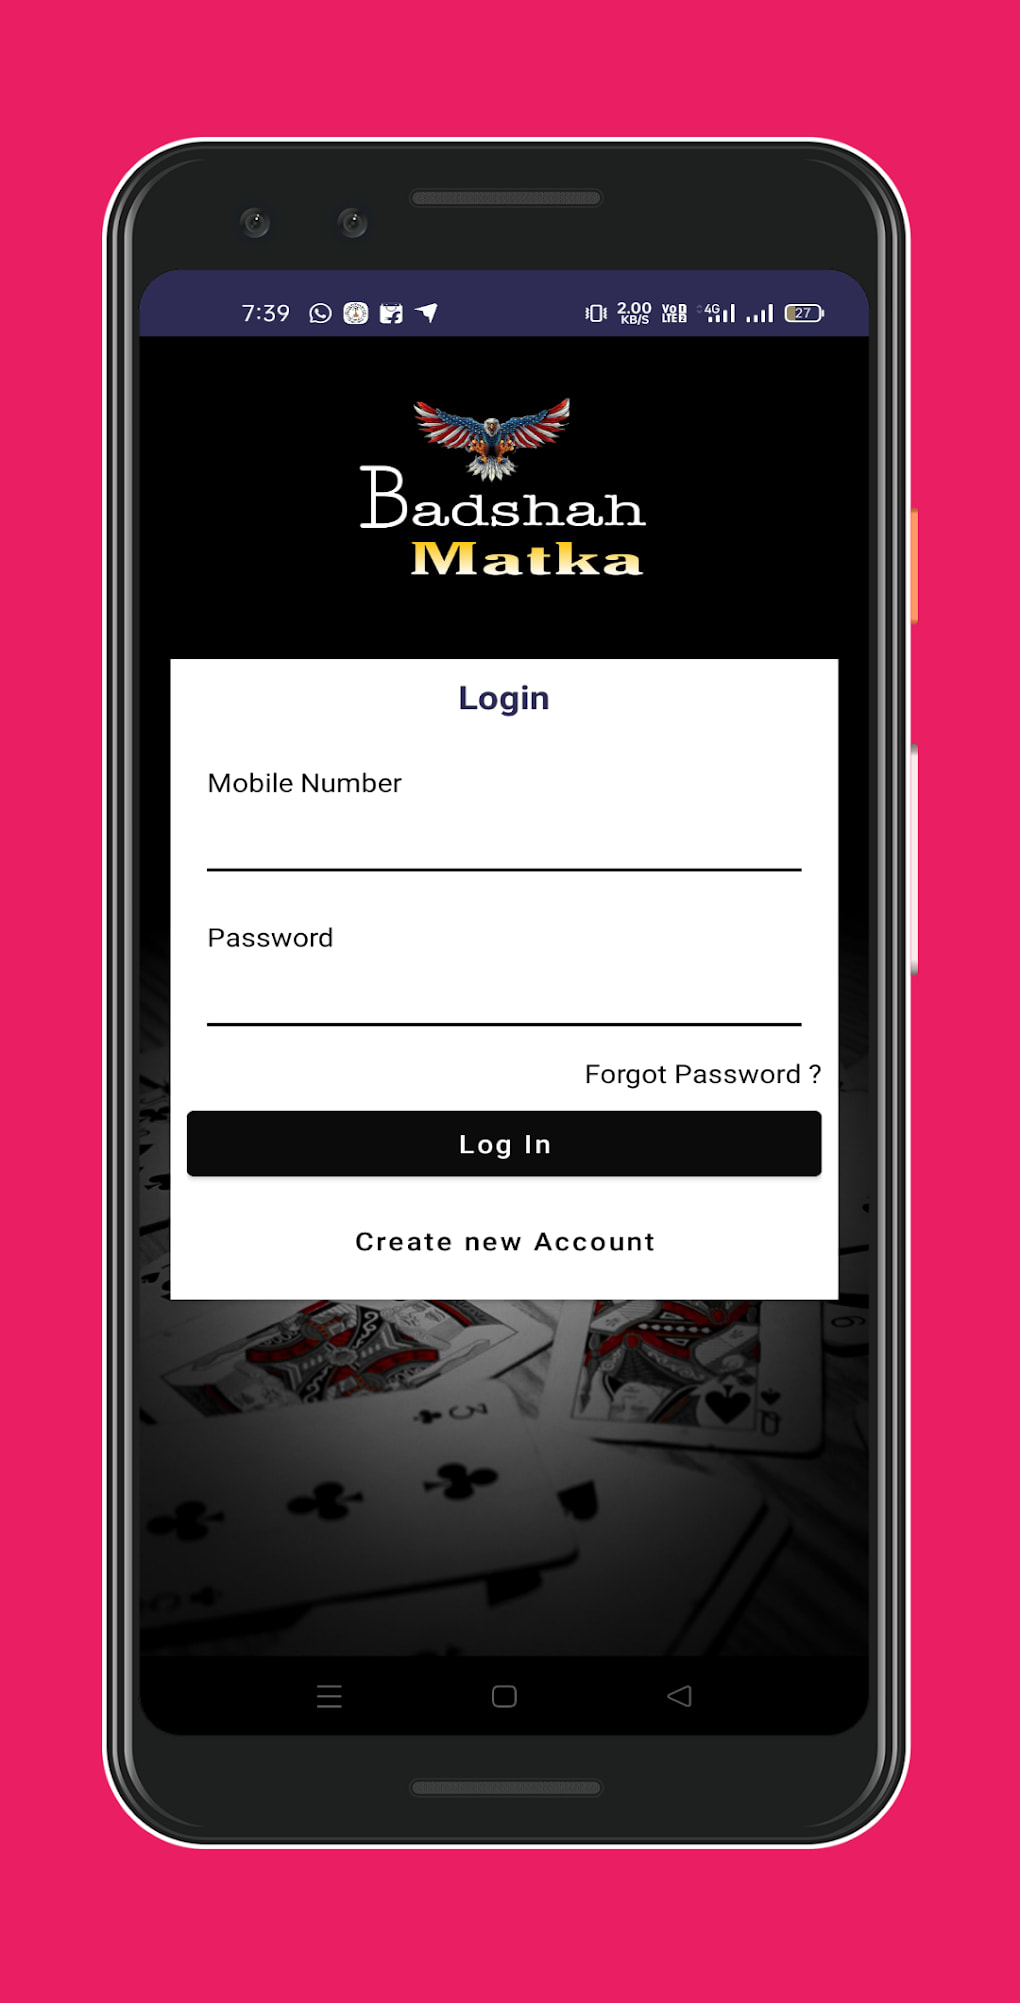 RS GAMES - Online play Matka app official APK Download for Windows